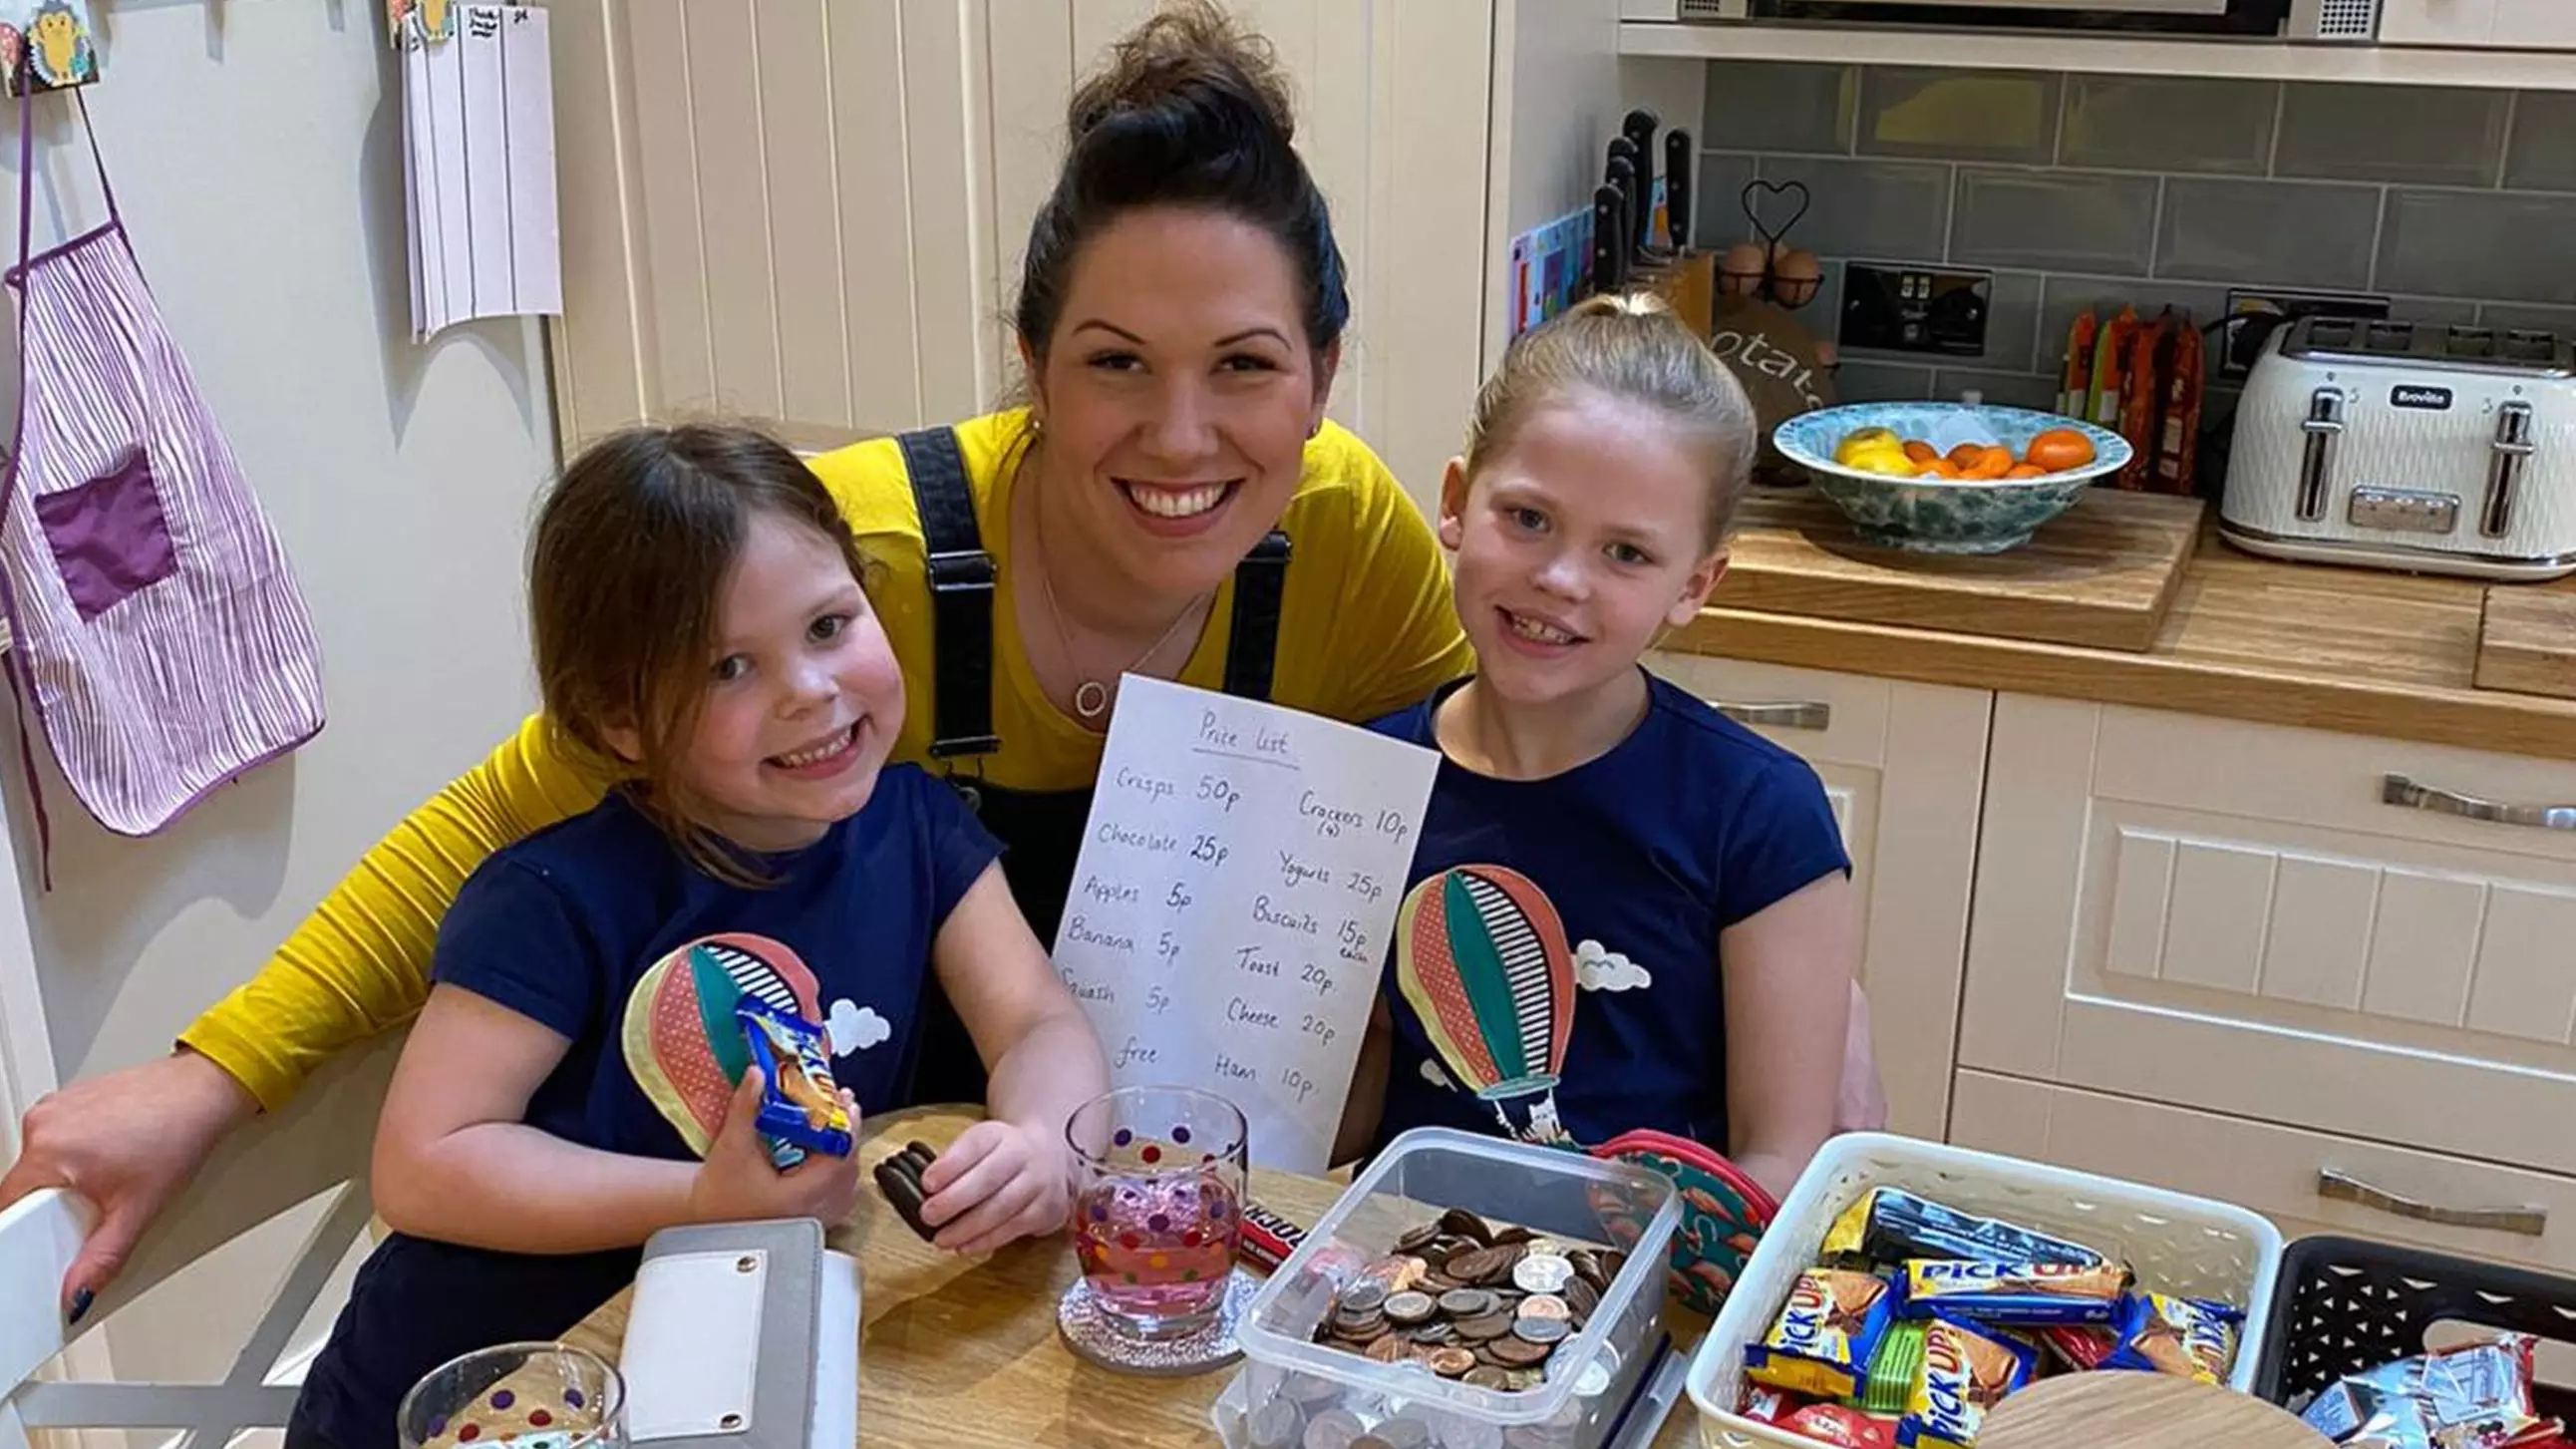 Mum's Ingenious Hack To Stop Her Kids Pestering Her For Sweets